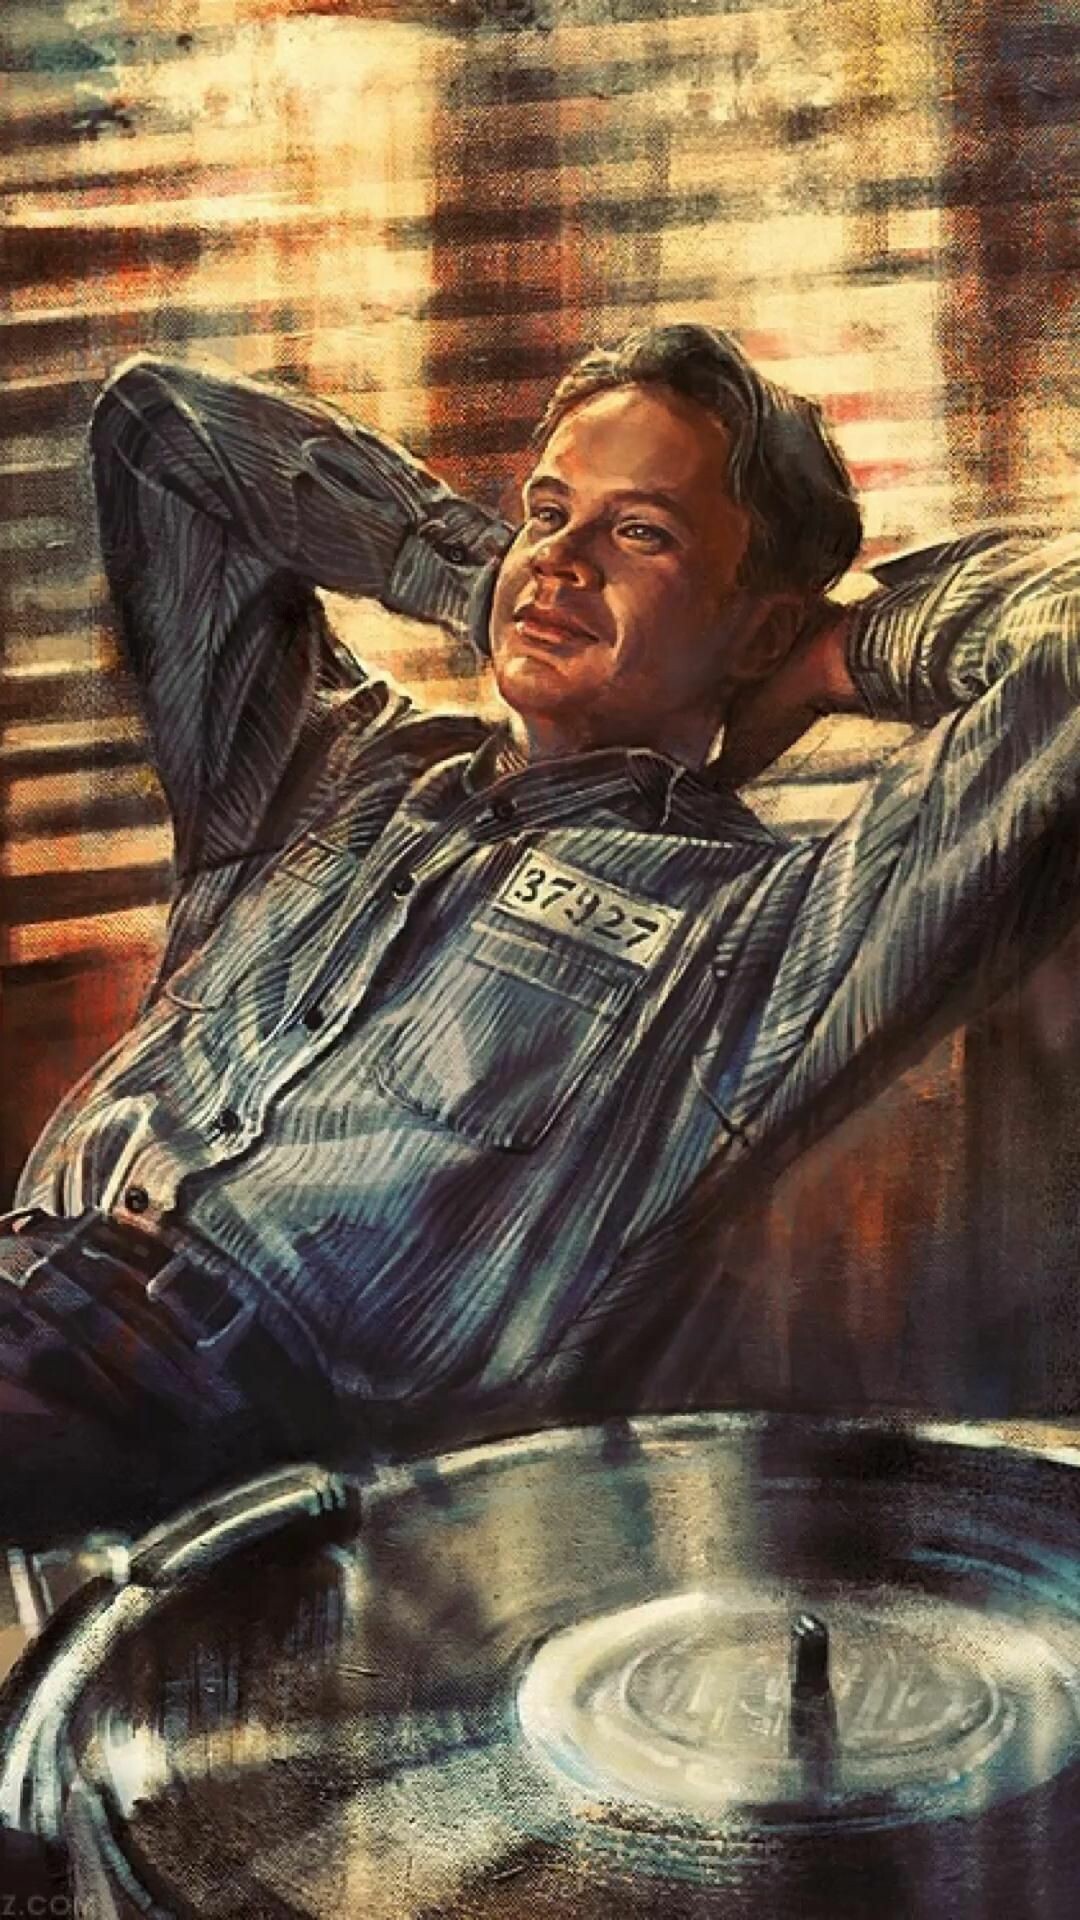 The Shawshank Redemption: Tim Robbins played Andy Dufresne, a banker wrongly accused of murder. 1080x1920 Full HD Background.